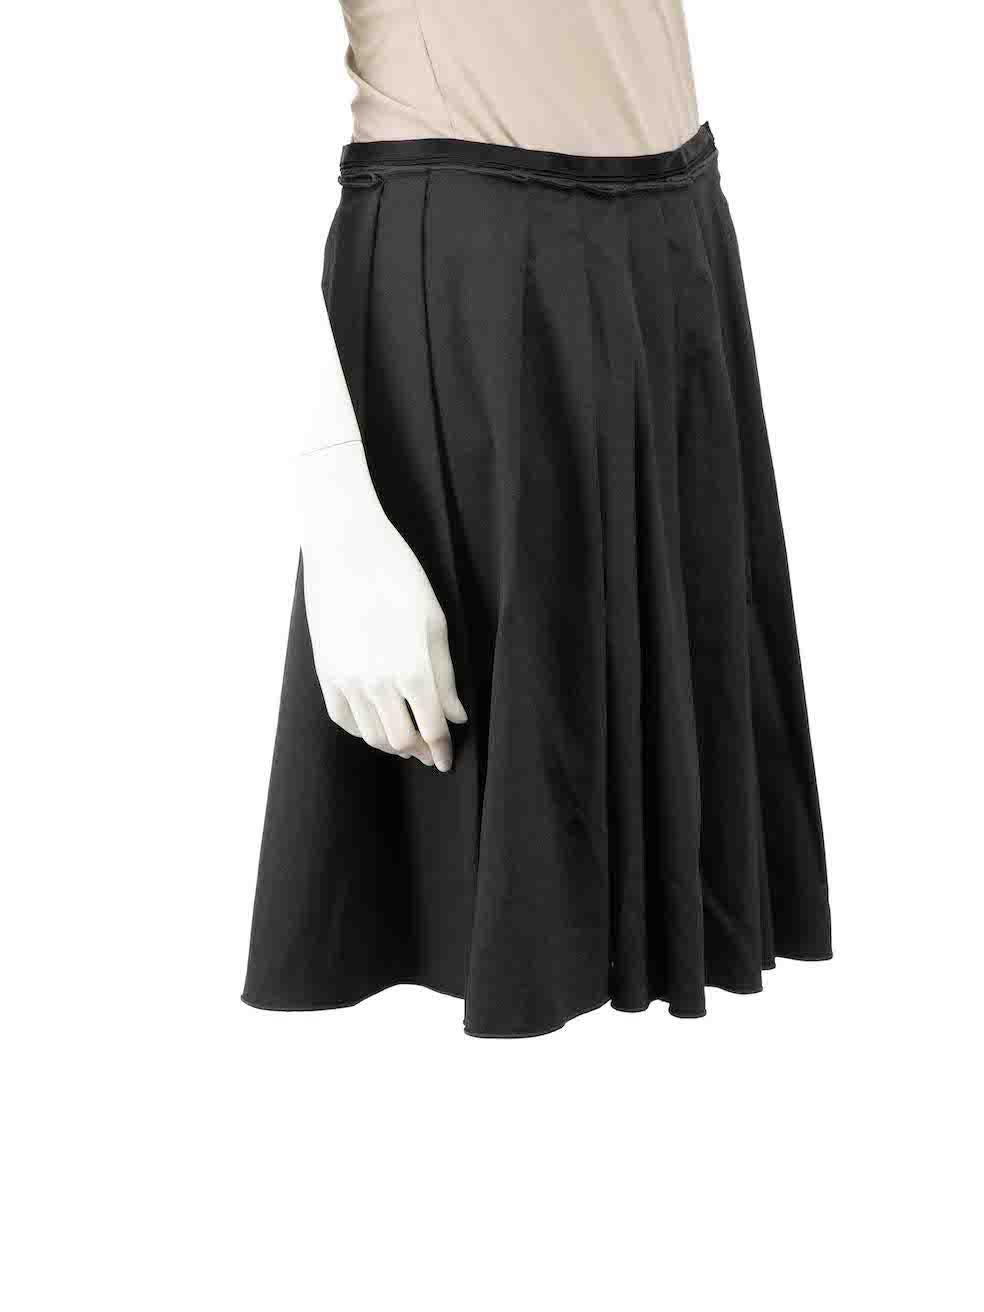 CONDITION is Good. Minor wear to skirt is evident. Light wear to the front with a small hole above the hem on this used Jil Sander Navy designer resale item.
 
 Details
 Black
 Wool
 Skirt
 Pleated
 Knee length
 Side zip and snap button fastening
 
